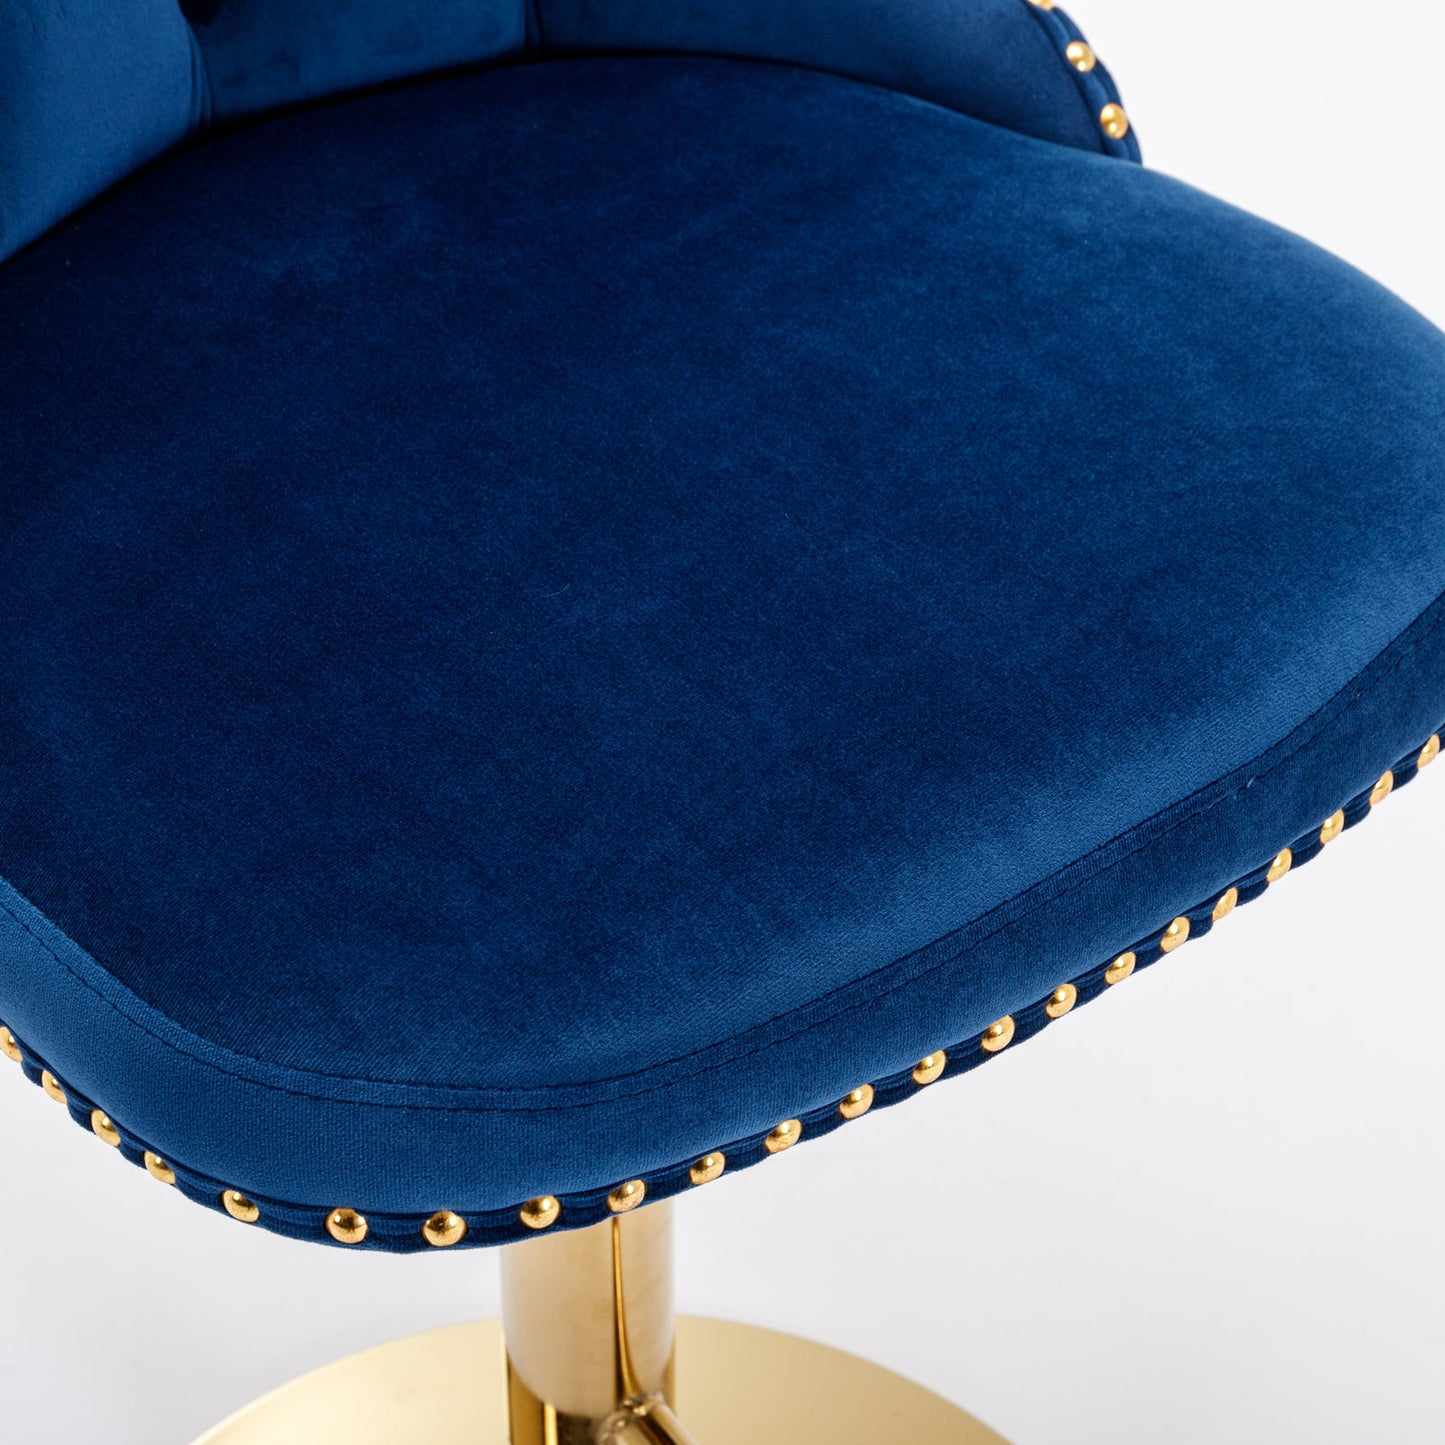 Blue Luxe Stool Set